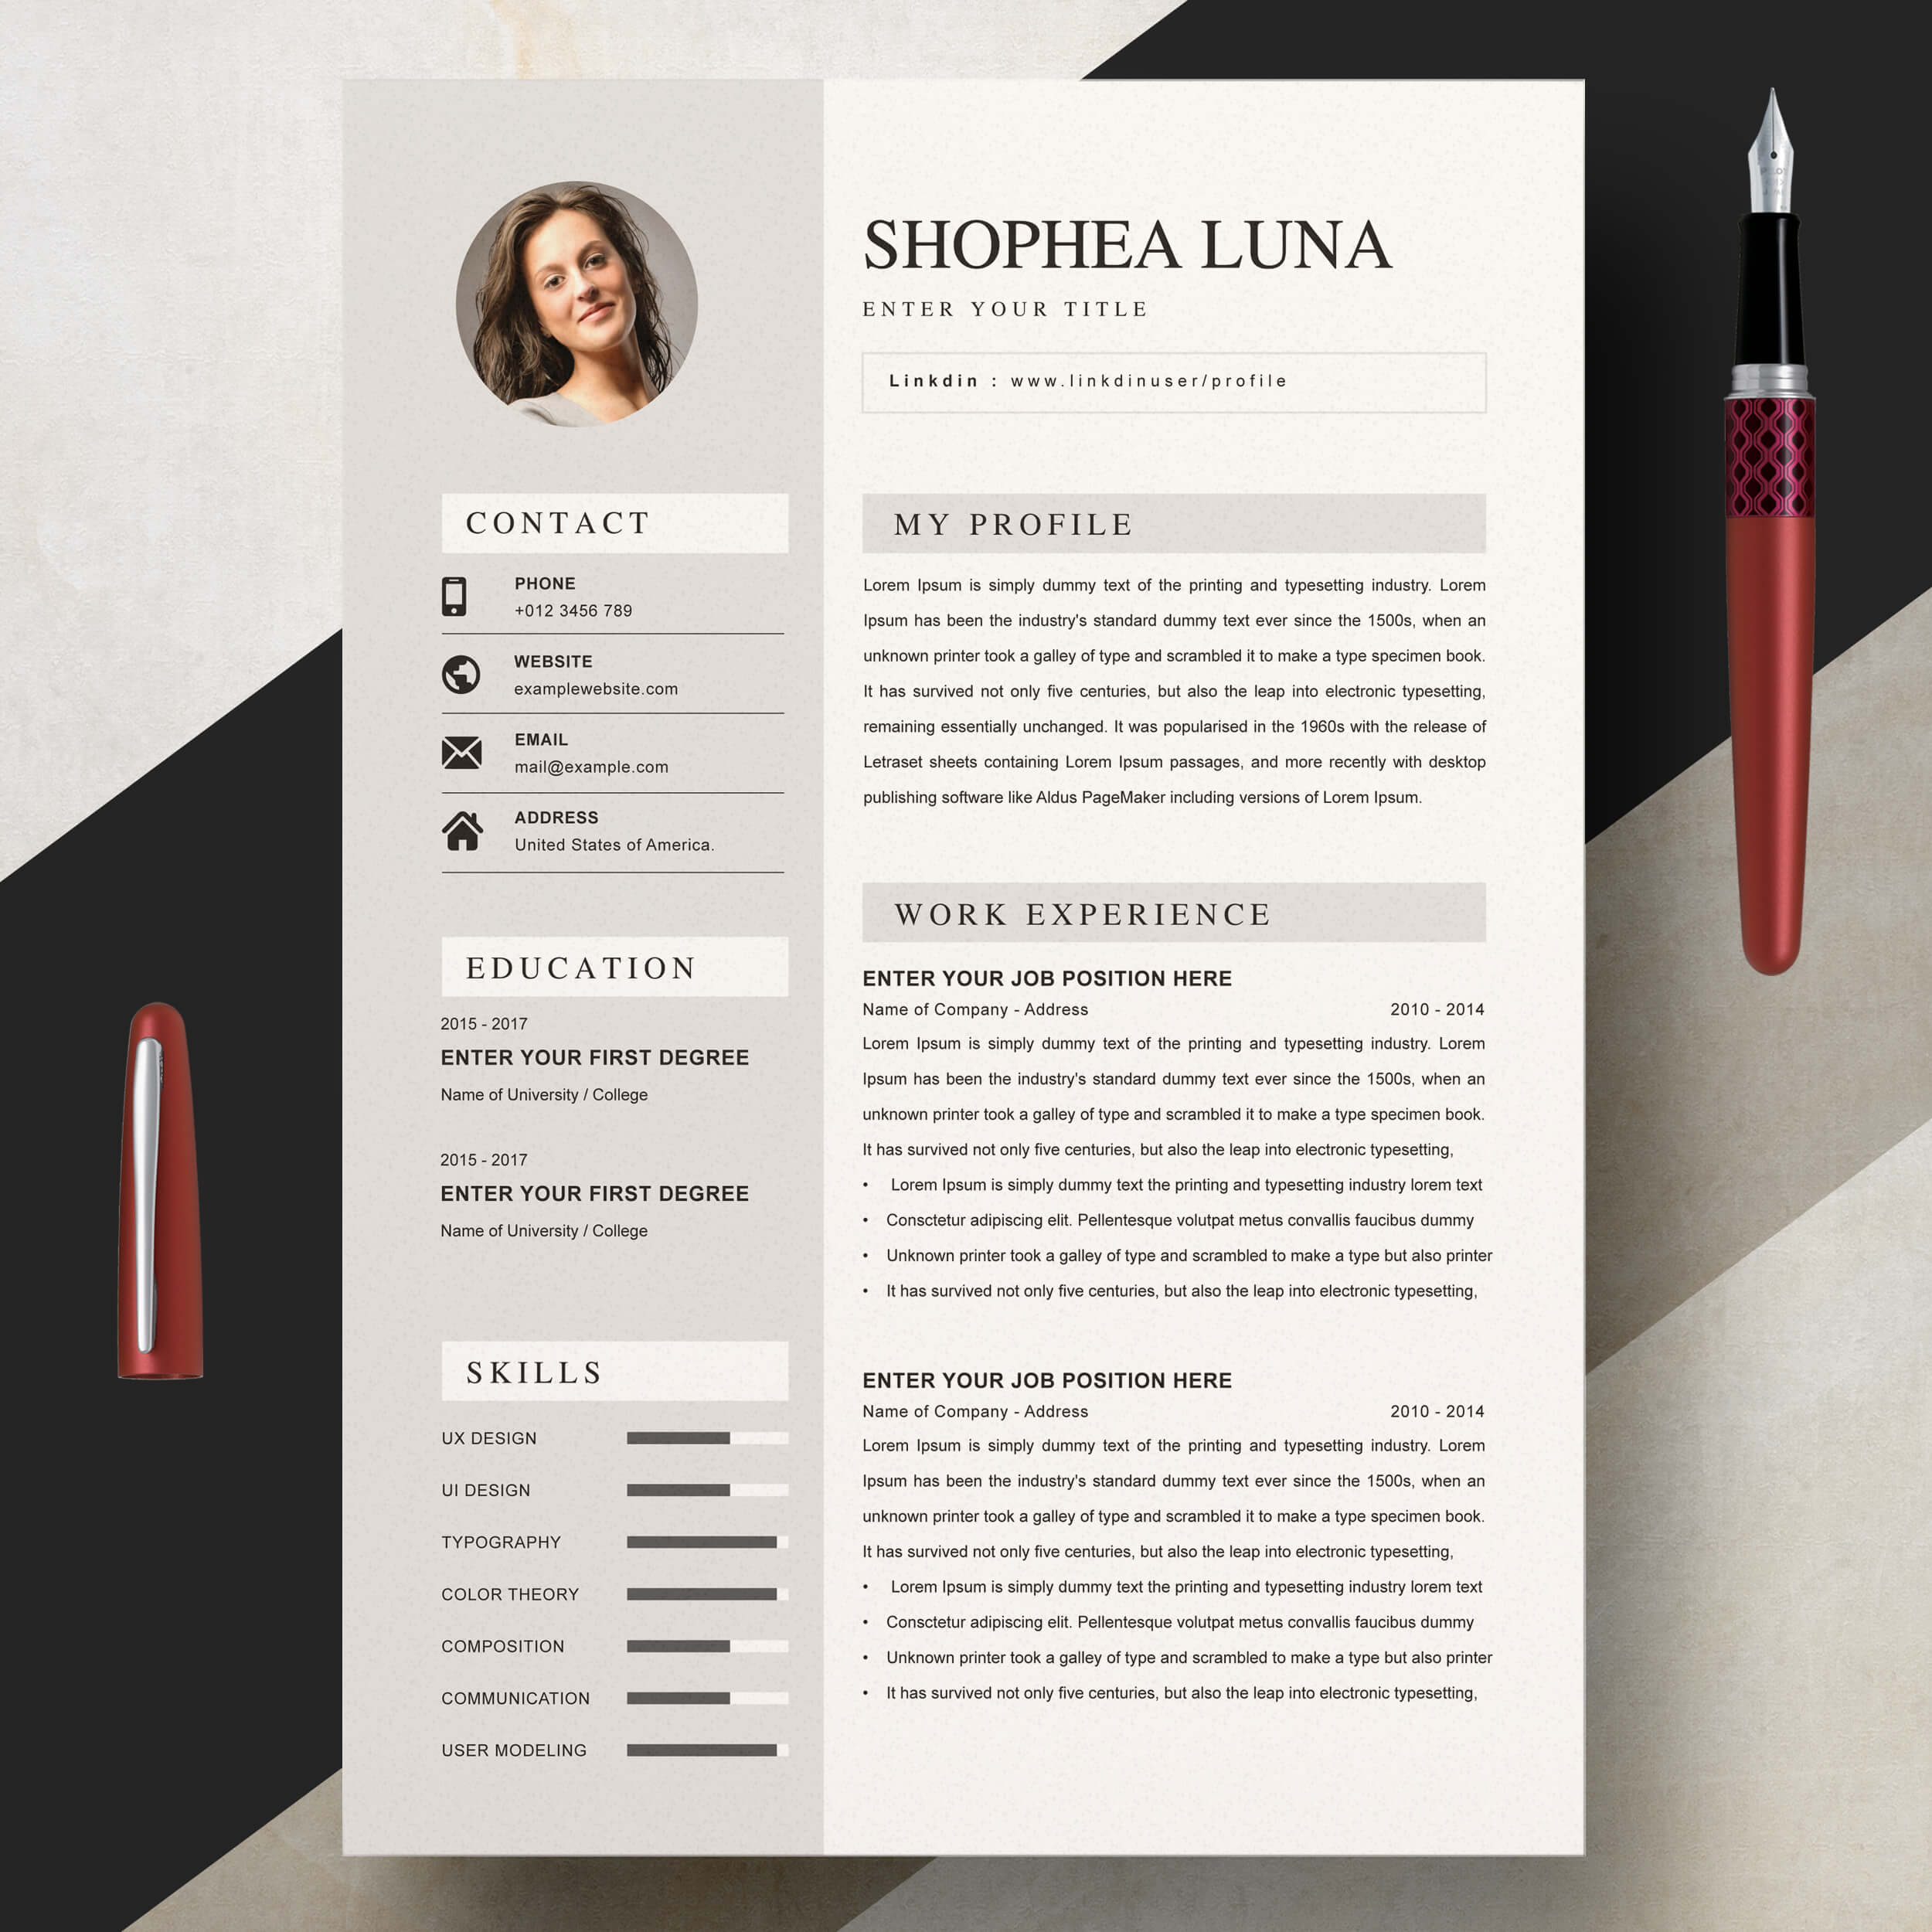 Creative Personal Resume Template | Resume Template With Cover Letter cover image.